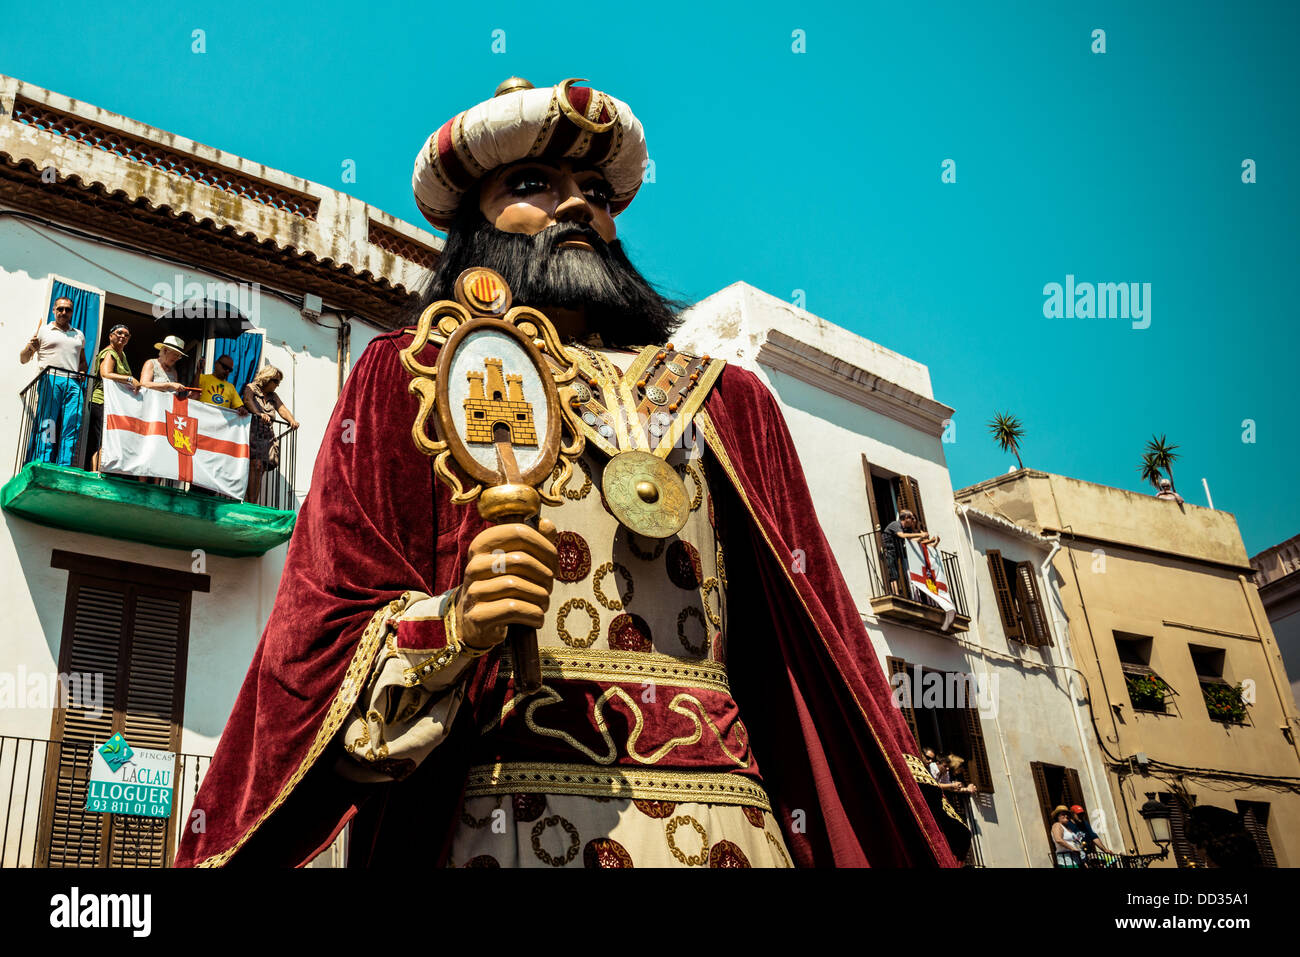 Sitges, Spain. August 24th, 2013: The giant of Sitges, a costumed figure known as "gegants", dances in the streets of Sitges during the Festa Major Credit:  matthi/Alamy Live News Stock Photo